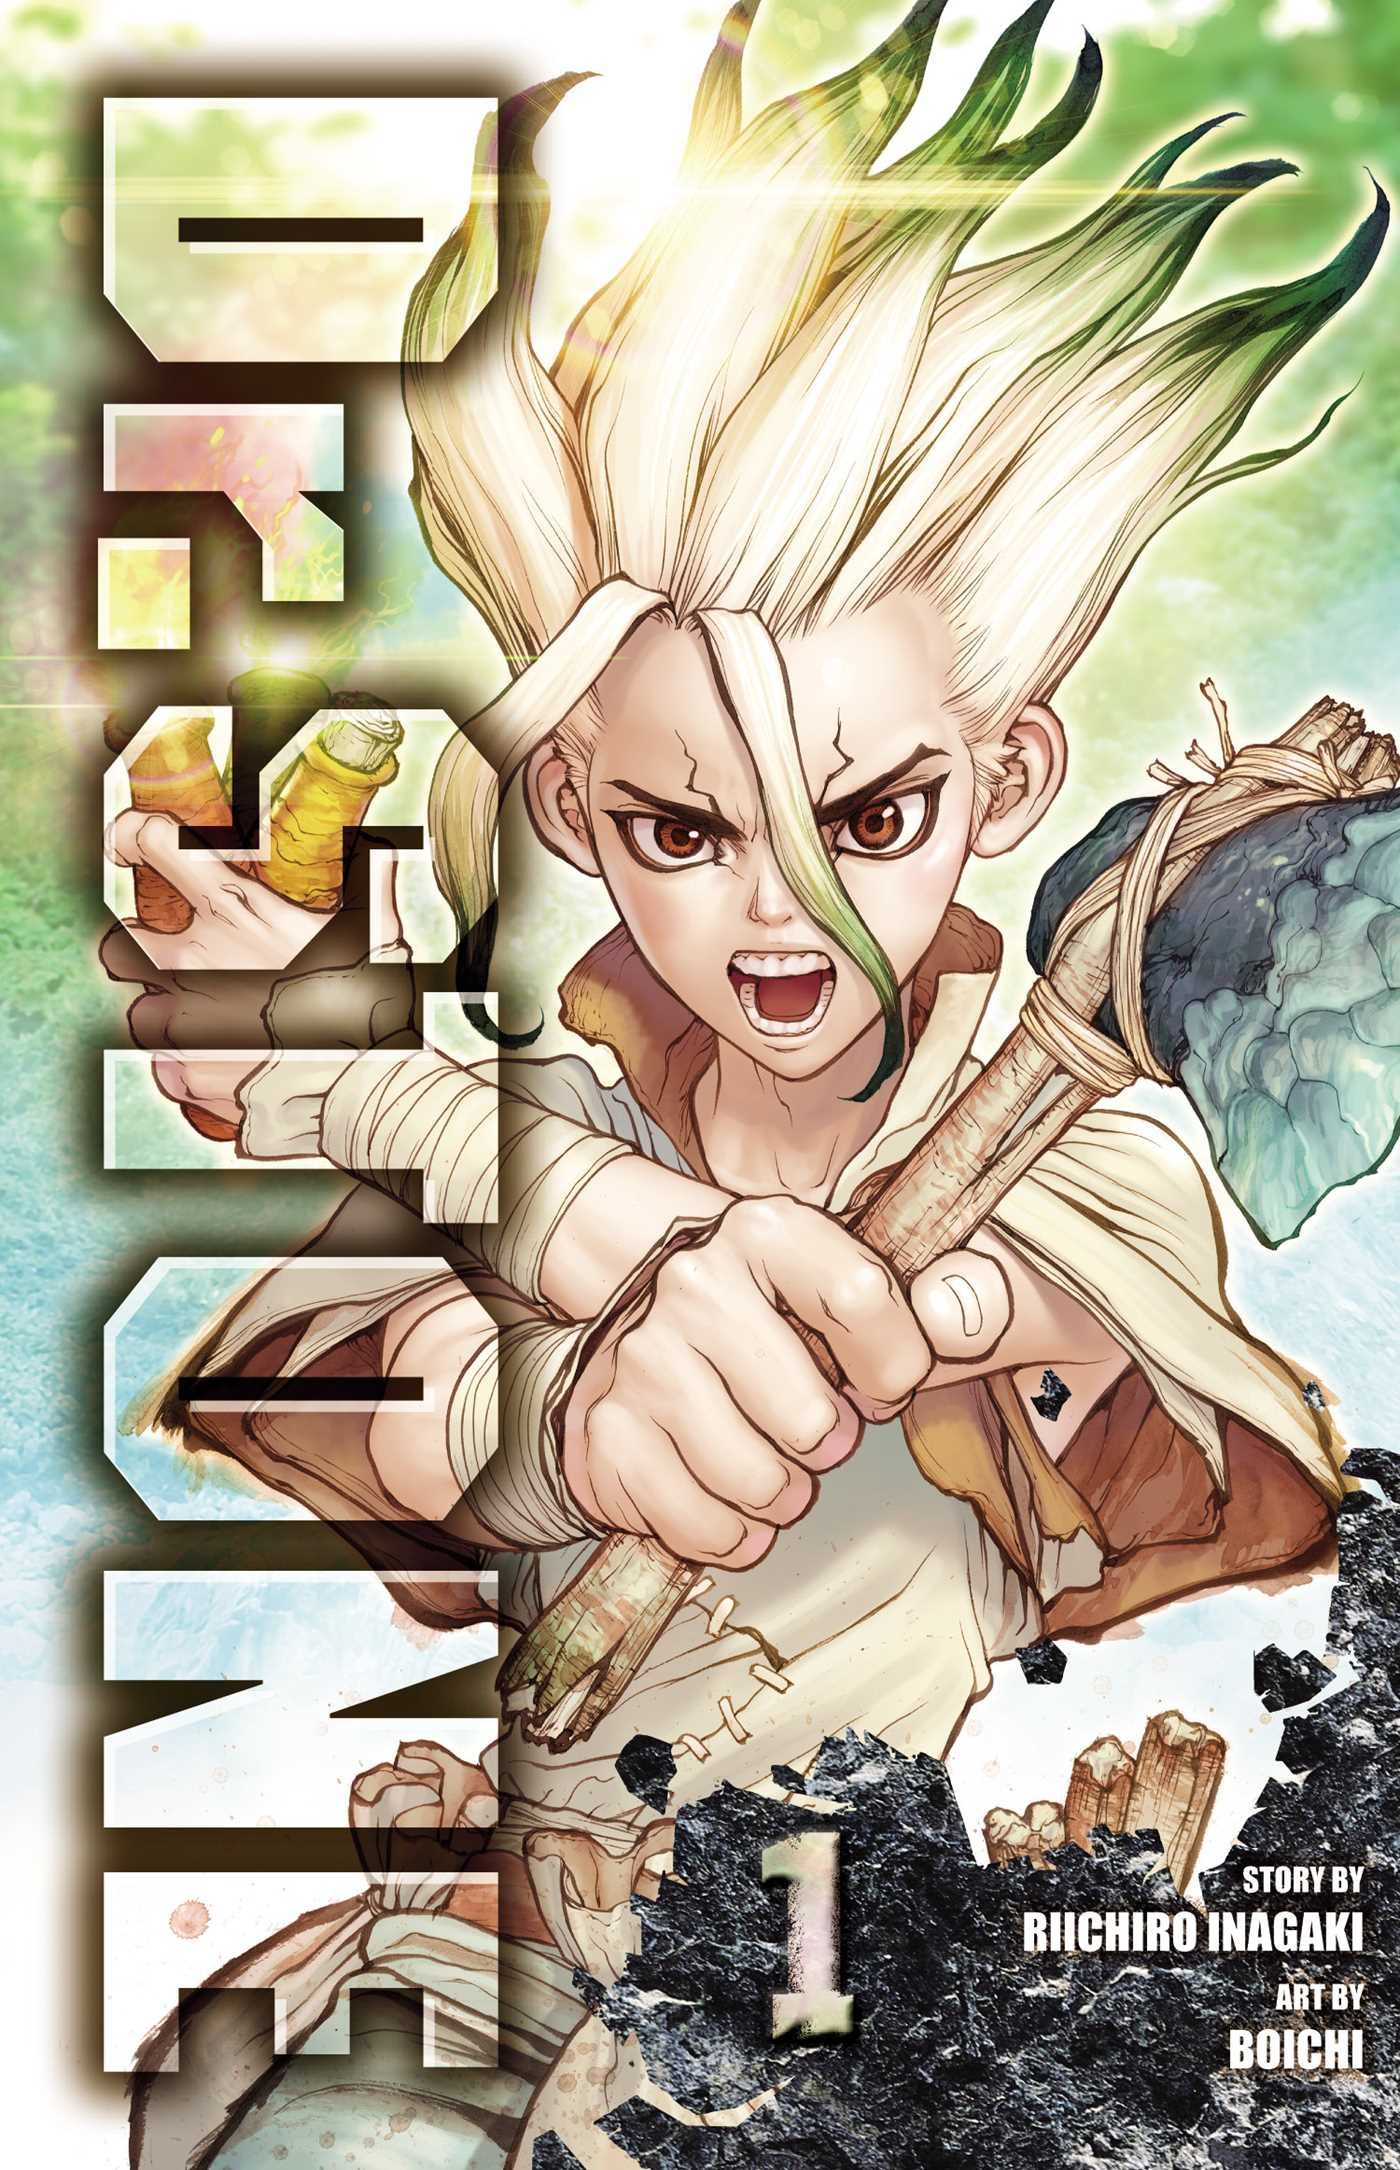 Image for "Dr. Stone"